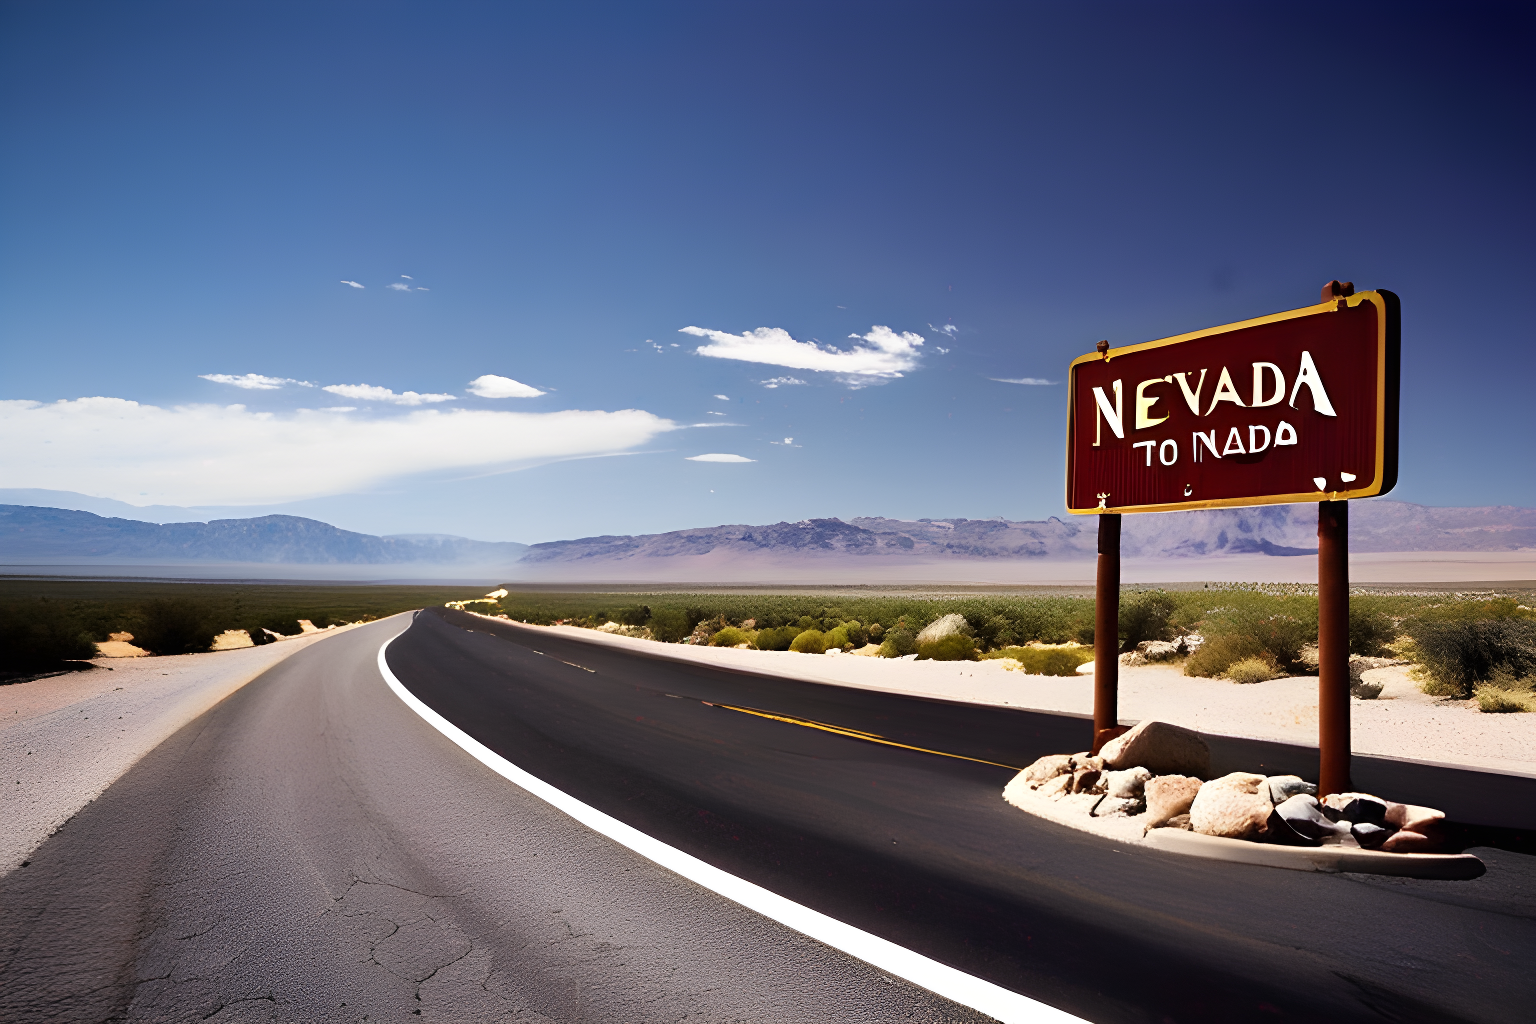 Breathtaking photograph of the welcome to nevada sign, open road in the background.